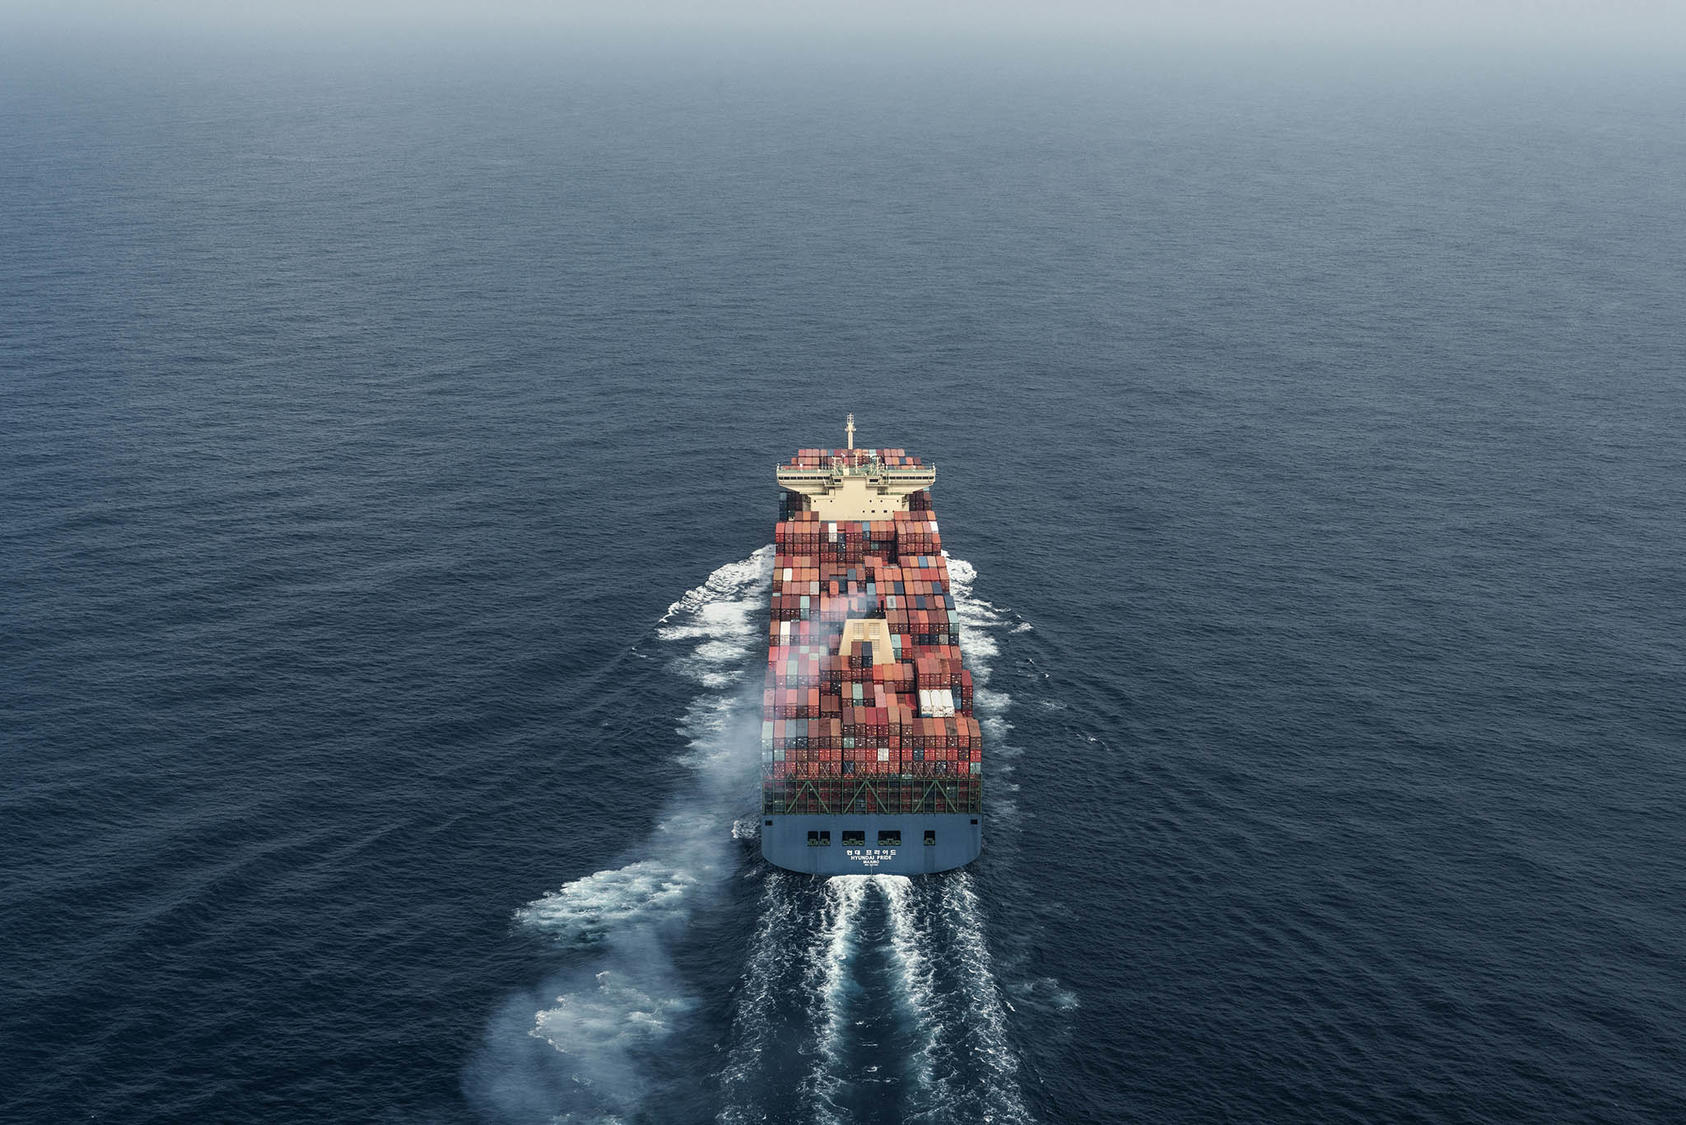 A cargo ship navigates one of the world’s busiest shipping lanes in the Indian Ocean, near Hambantota, Sri Lanka. May 2, 2018. (Adam Dean/The New York Times)